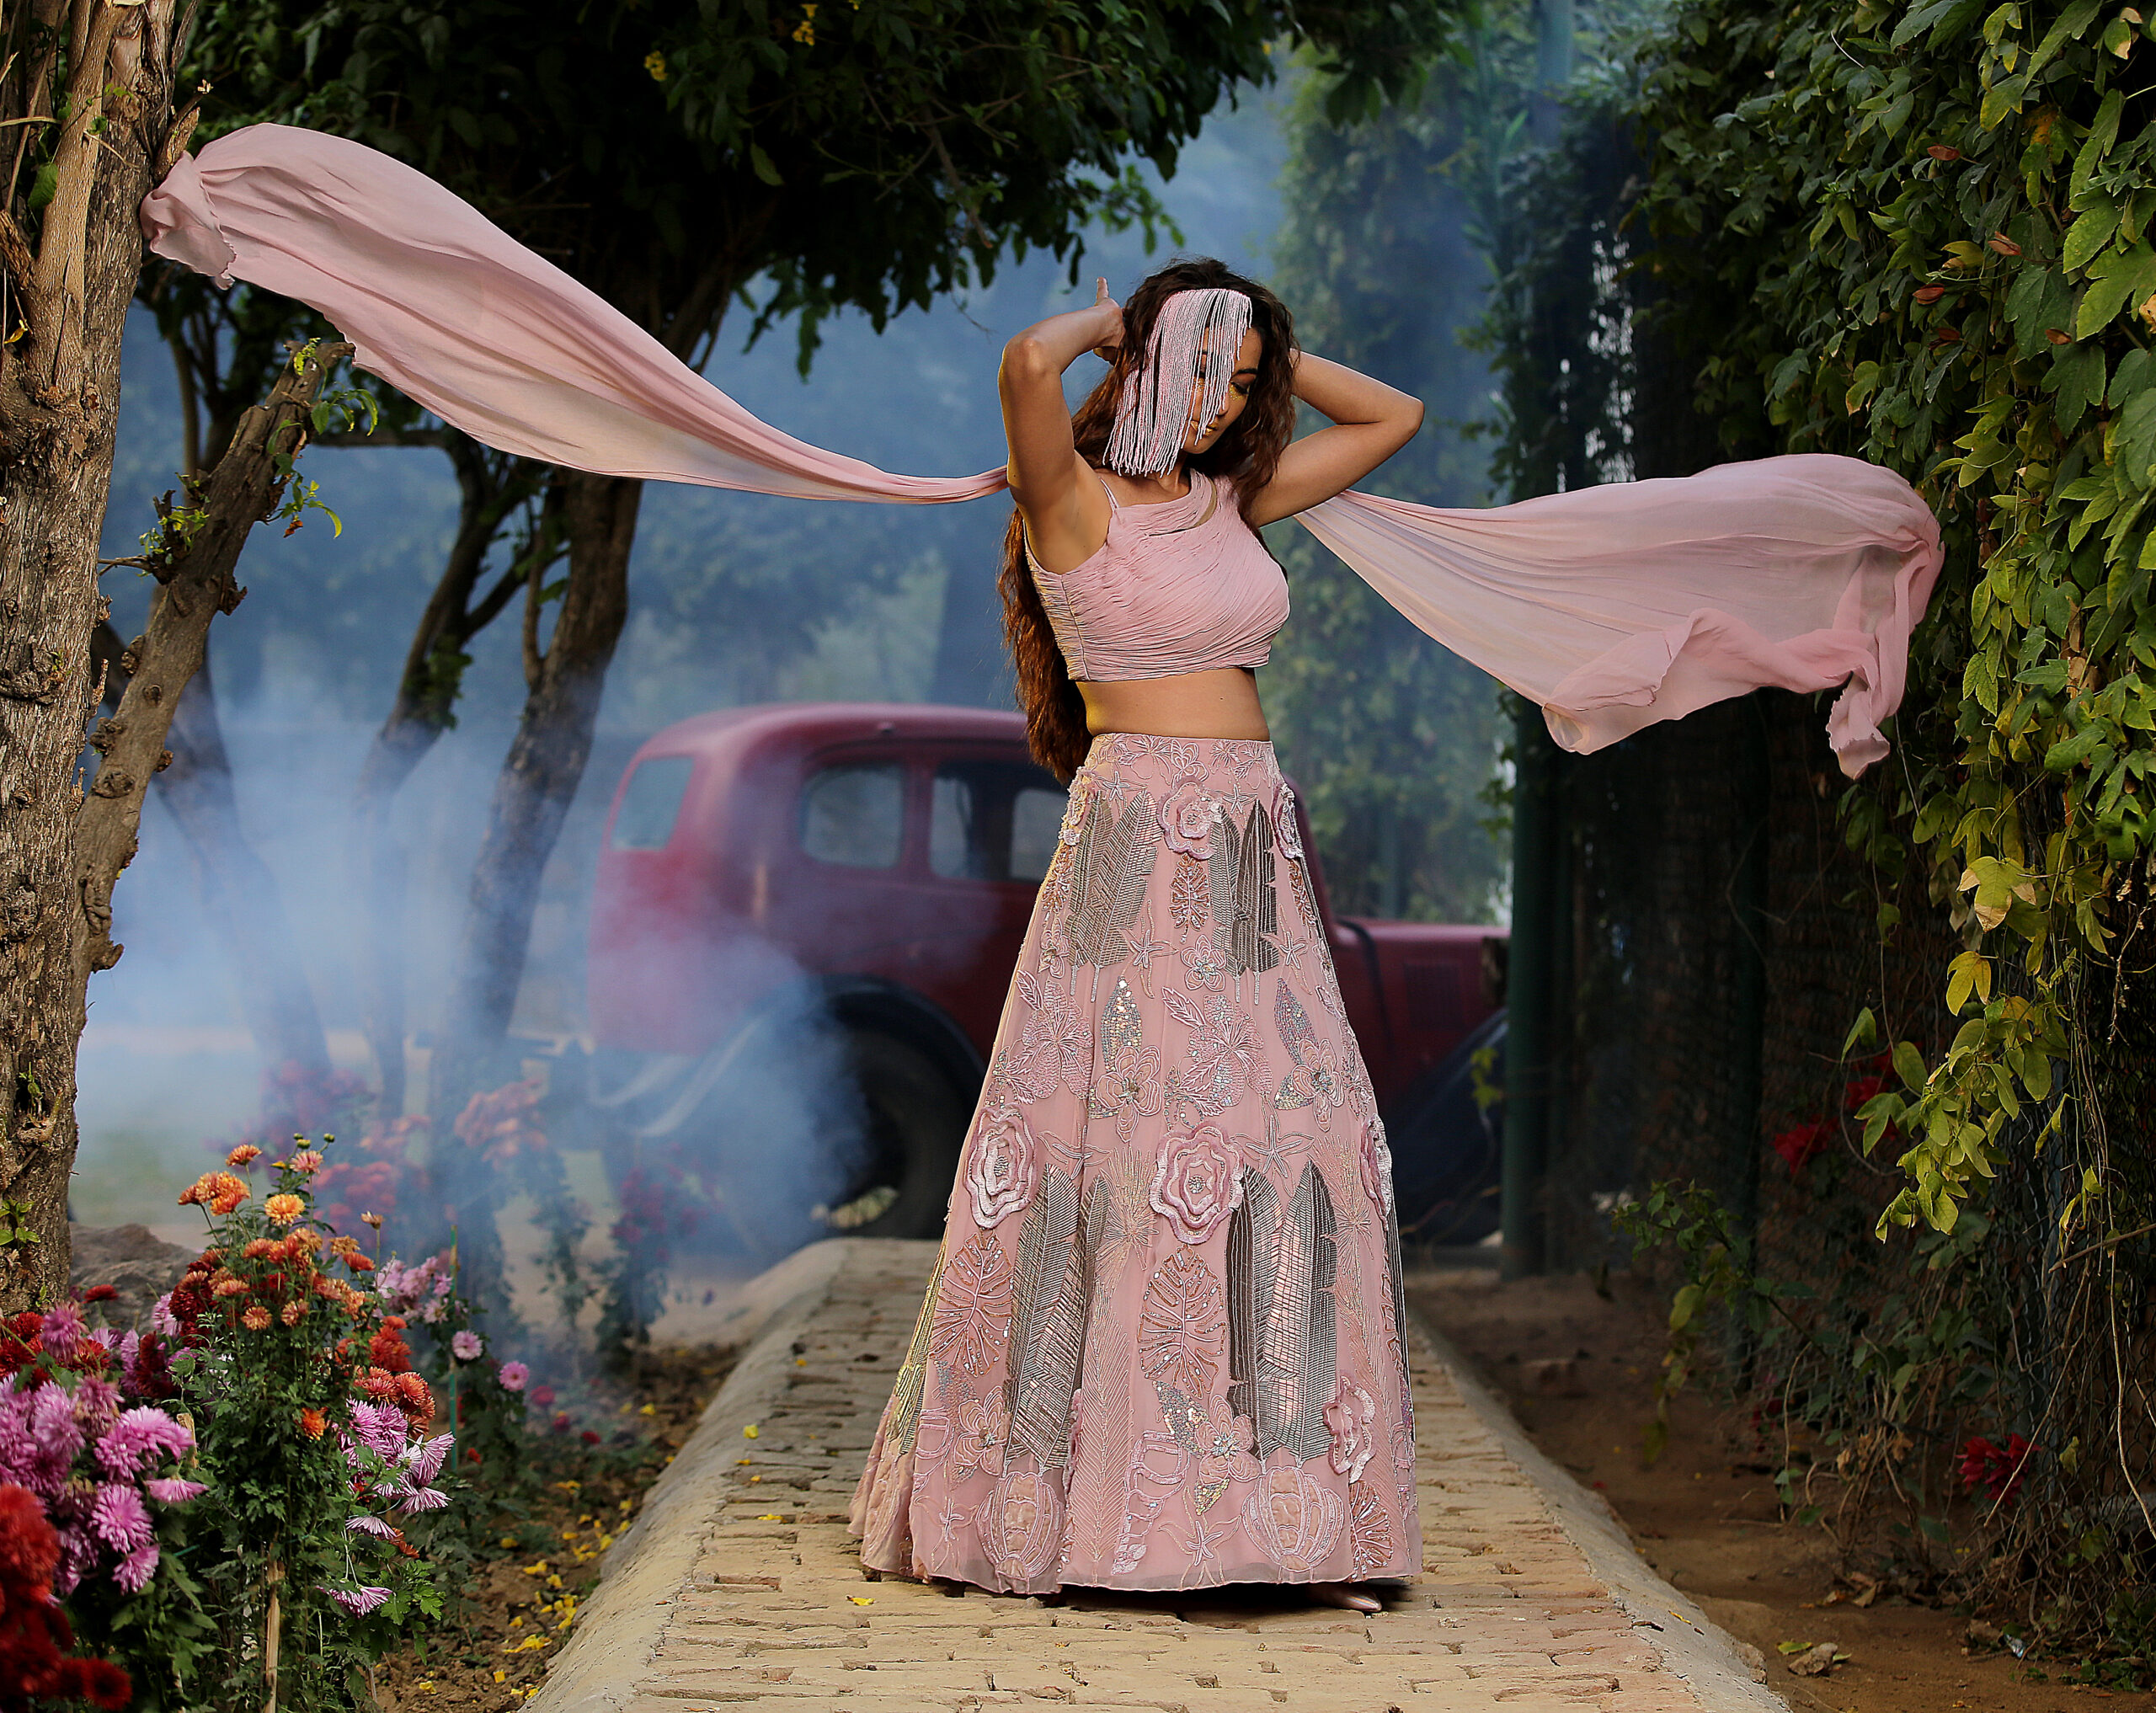 Exquisitely crafted lehenga with fine hues of pink and a touch of silver to bring just the right amount of drama